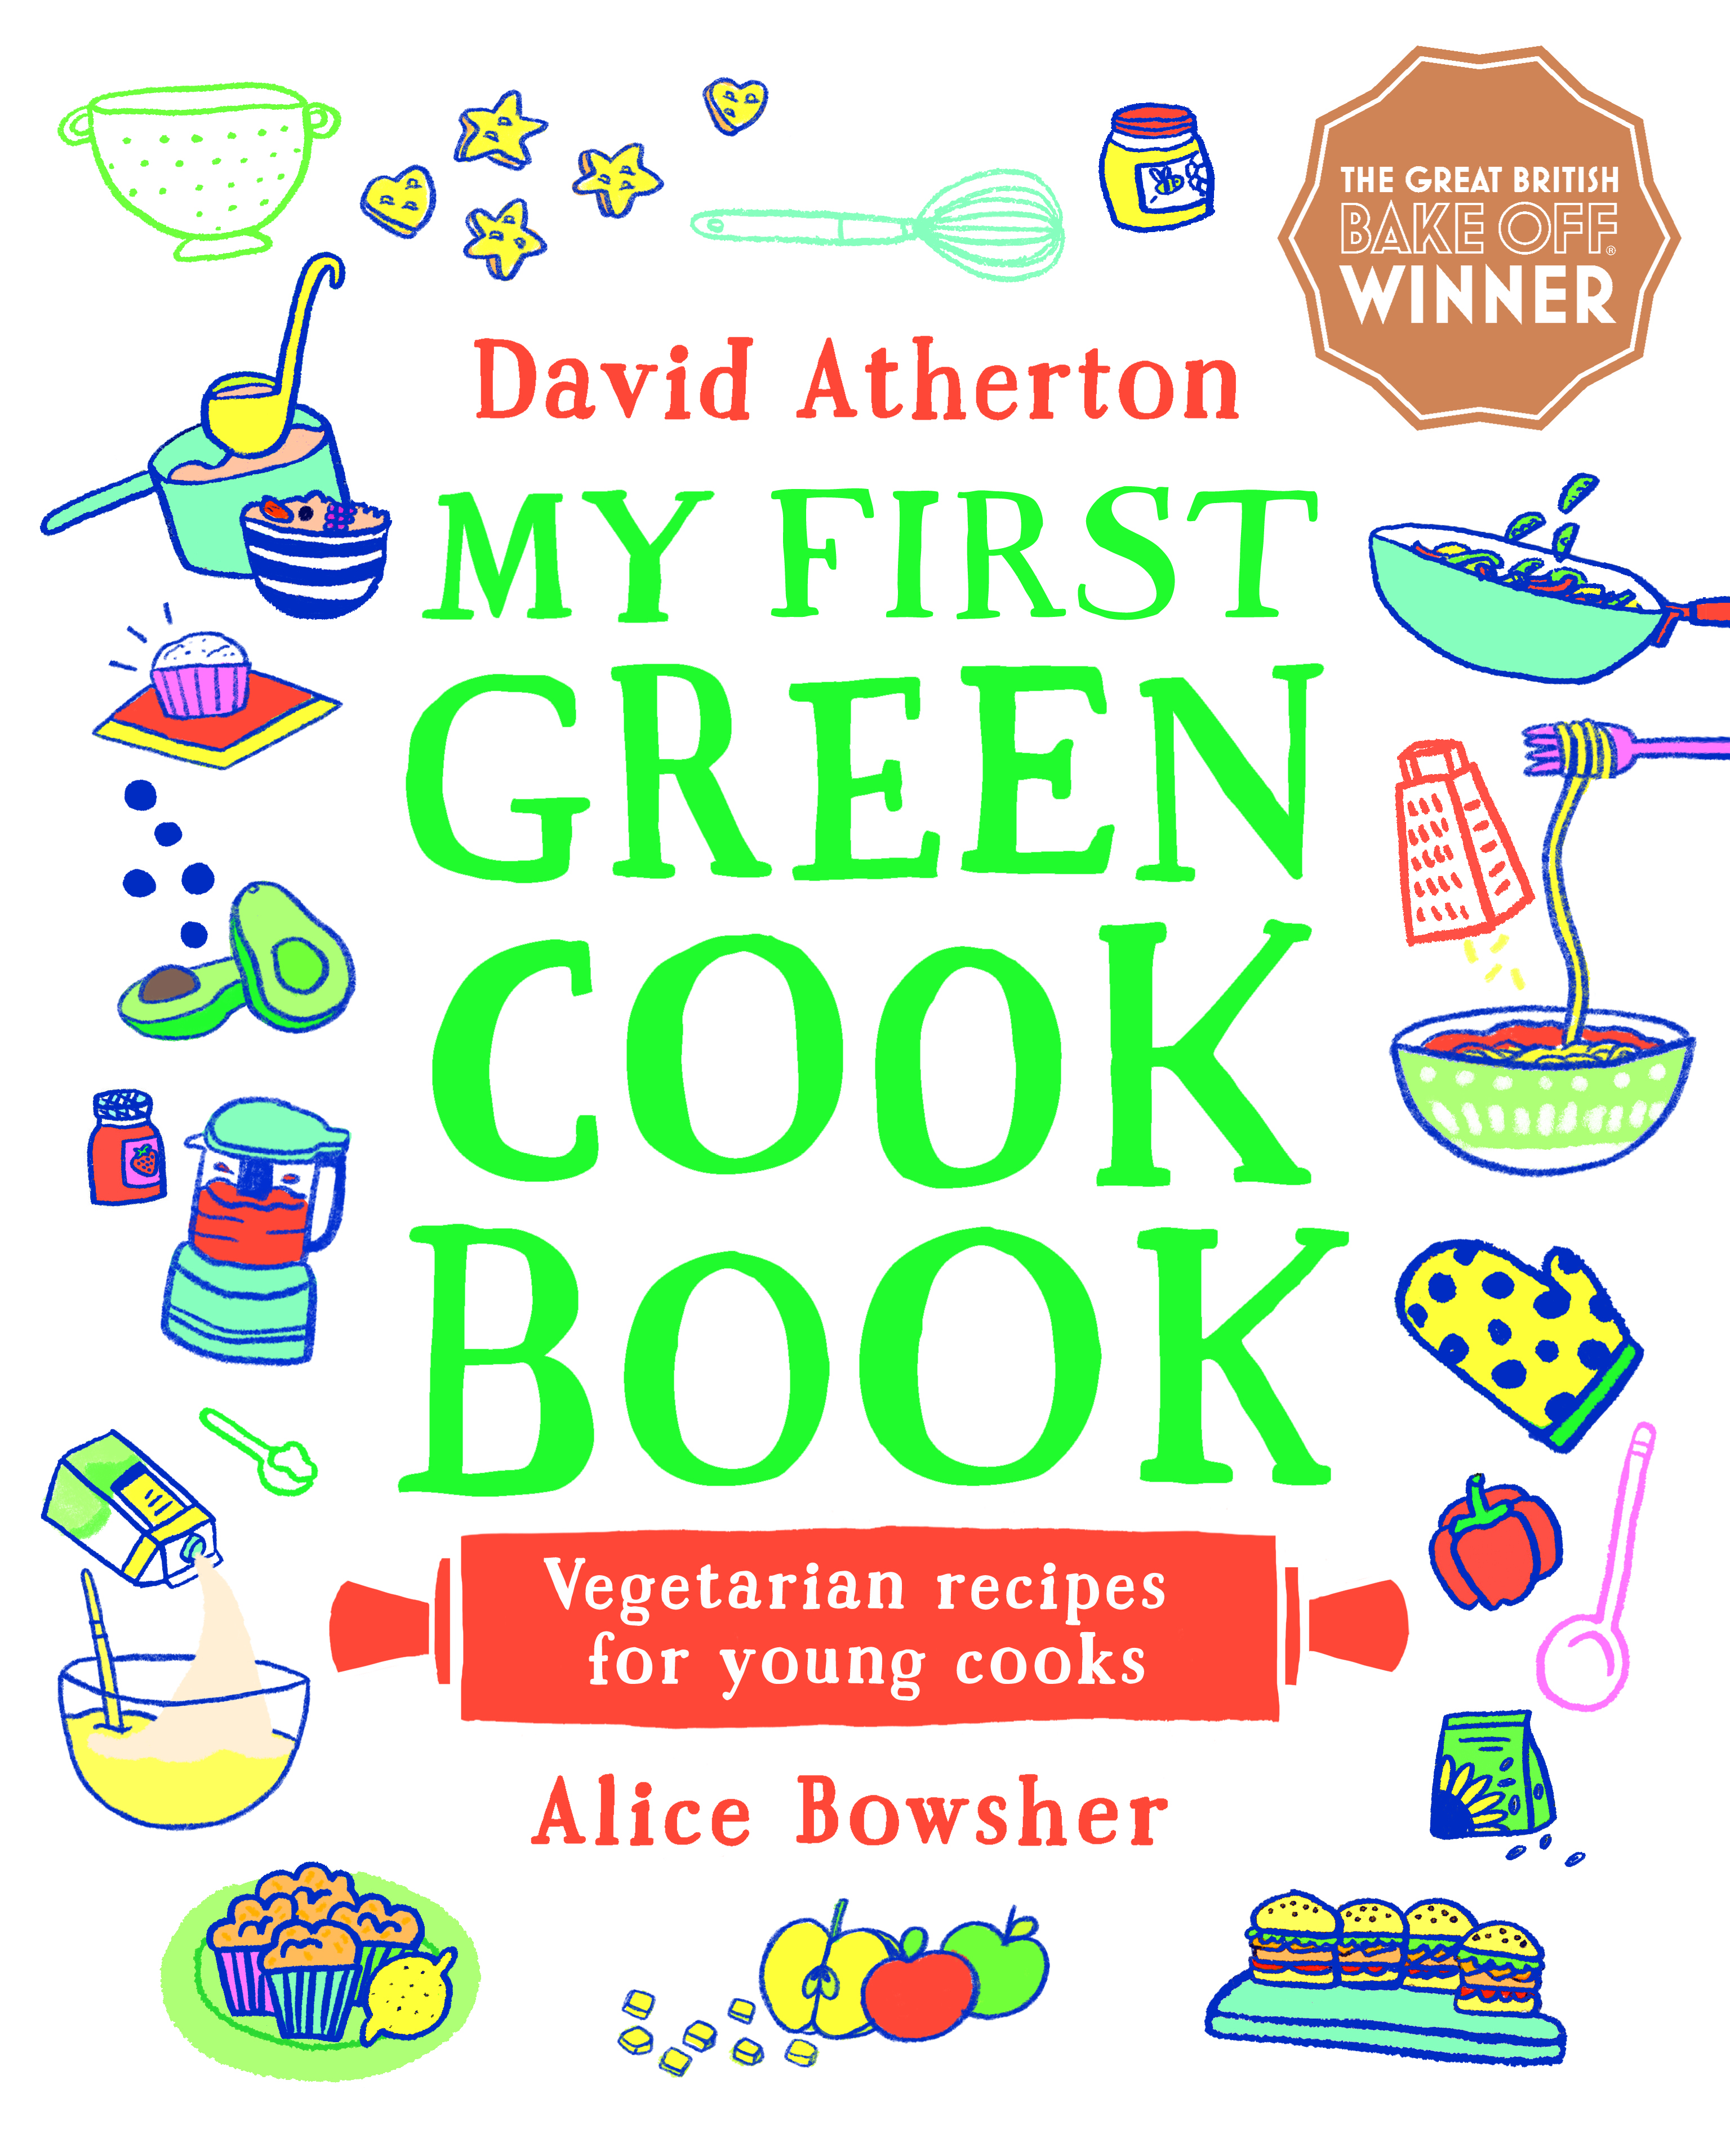 My-First-Green-Cook-Book-Vegetarian-Recipes-for-Young-Cooks